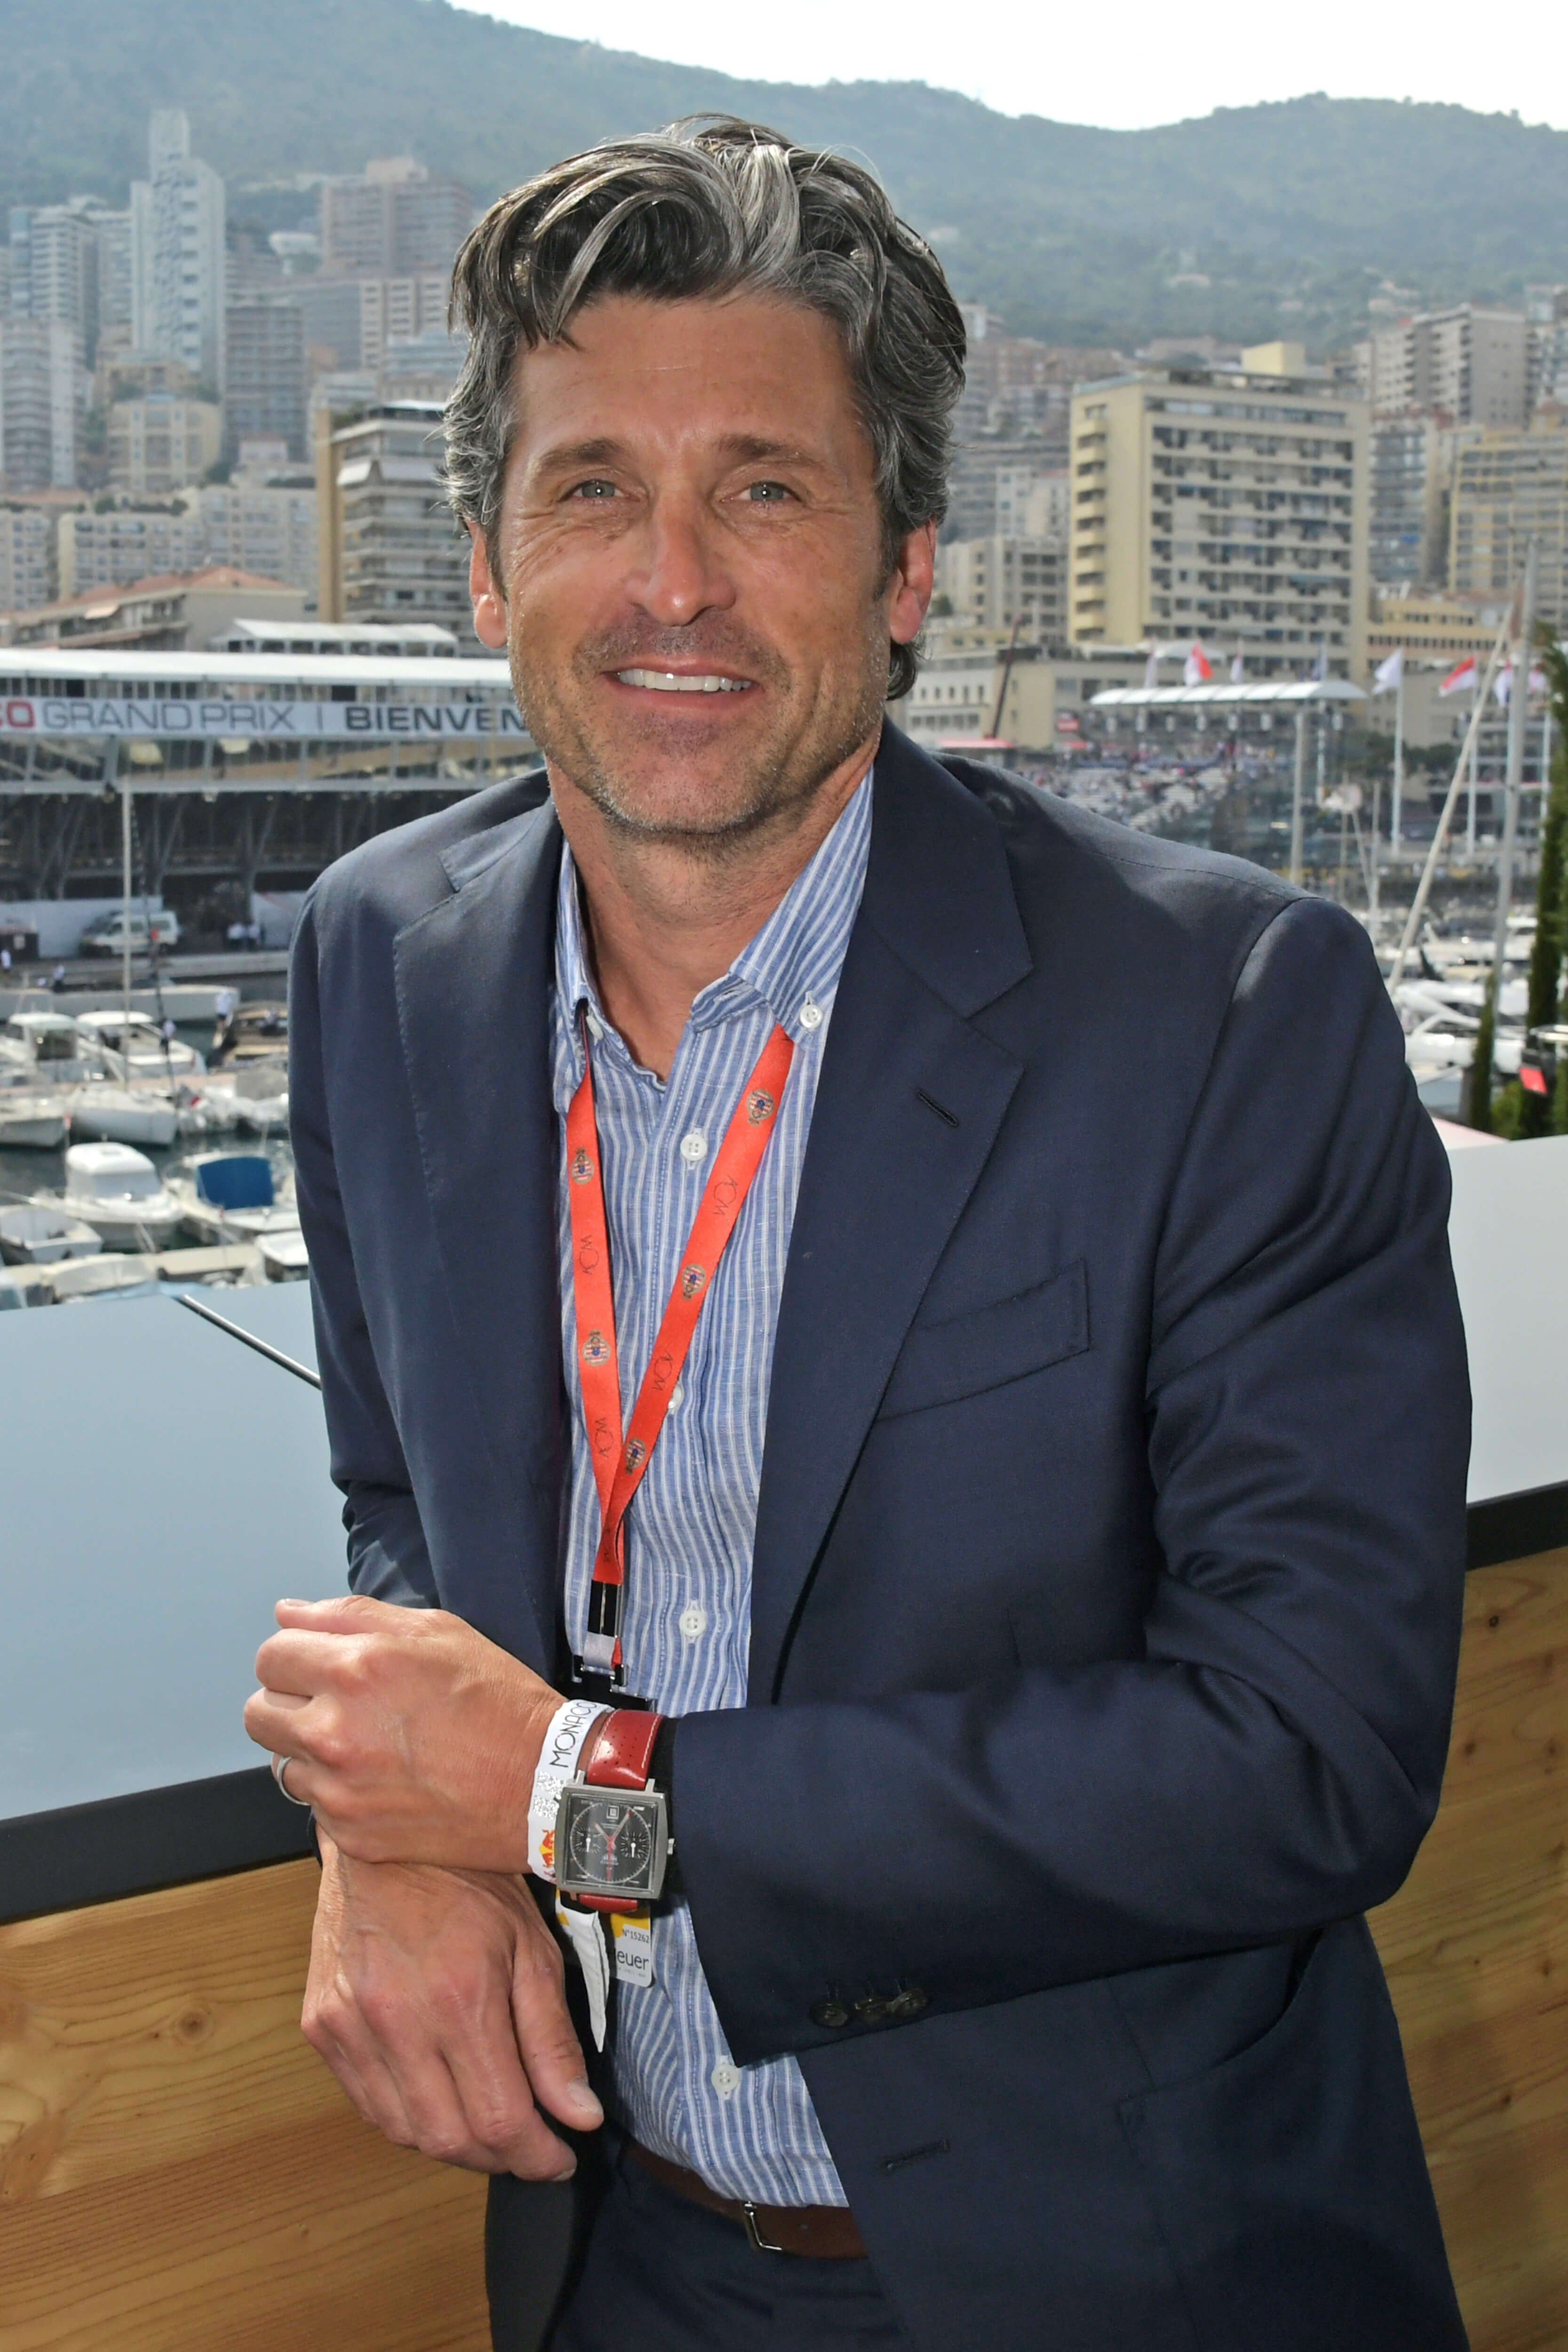 MONACO - MAY 26: Patrick Dempsey celebrates 50 Years of the Monaco Watch at the Formula 1 Grand Prix De Monaco, the legendary event that gave the watch its name in 1969, on May 26, 2019 in Monaco. (Photo by David M. Benett/Dave Benett/Getty Images for TAG Heuer)